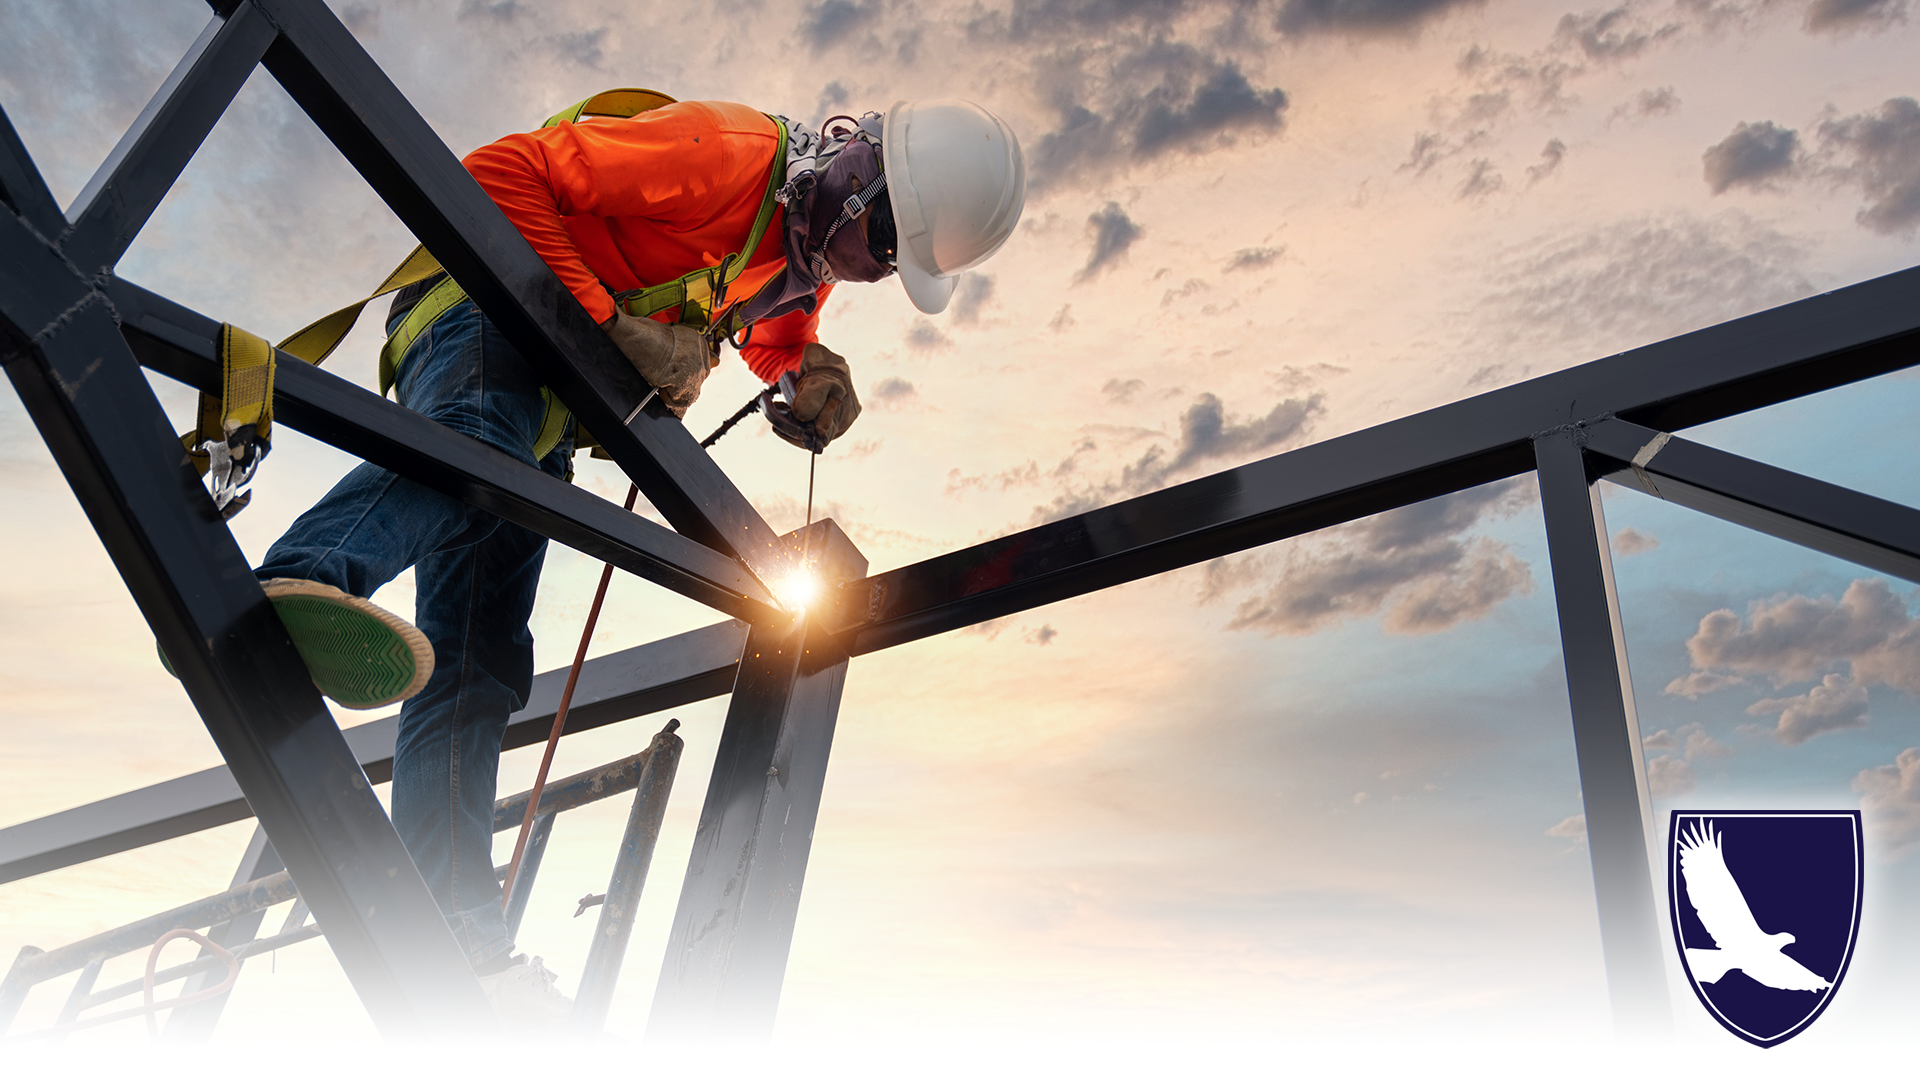 A welder is welding steel on a steel roof truss. Working at height equipment. Fall arrestor device for worker with hooks for safety body harness. Worker in construction